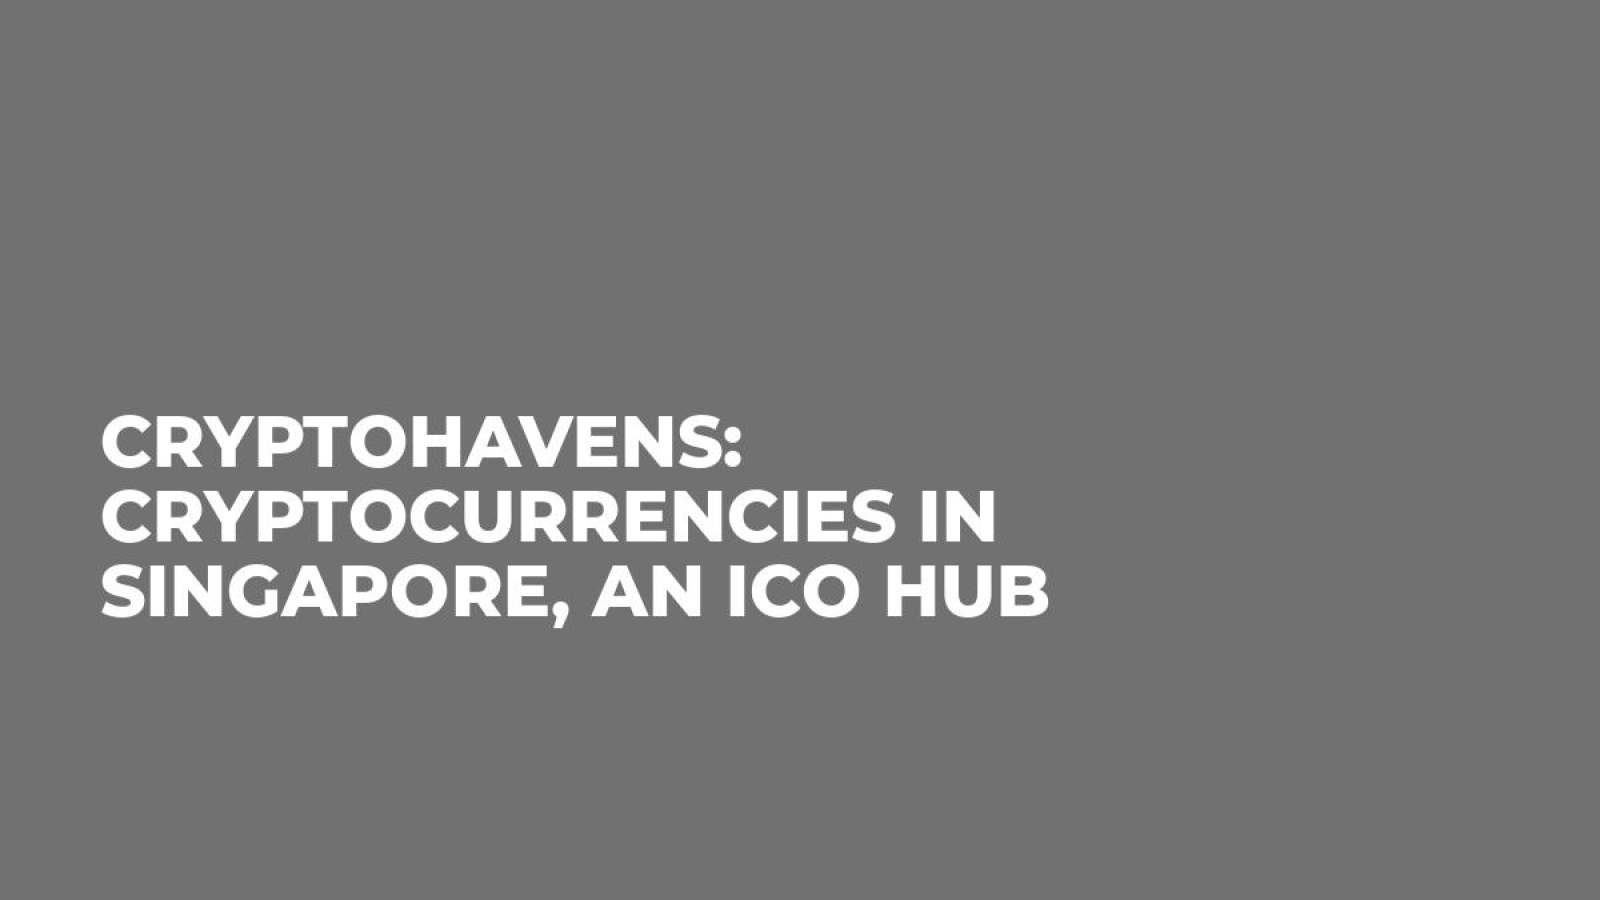 CryptoHavens: Cryptocurrencies in Singapore, an ICO Hub